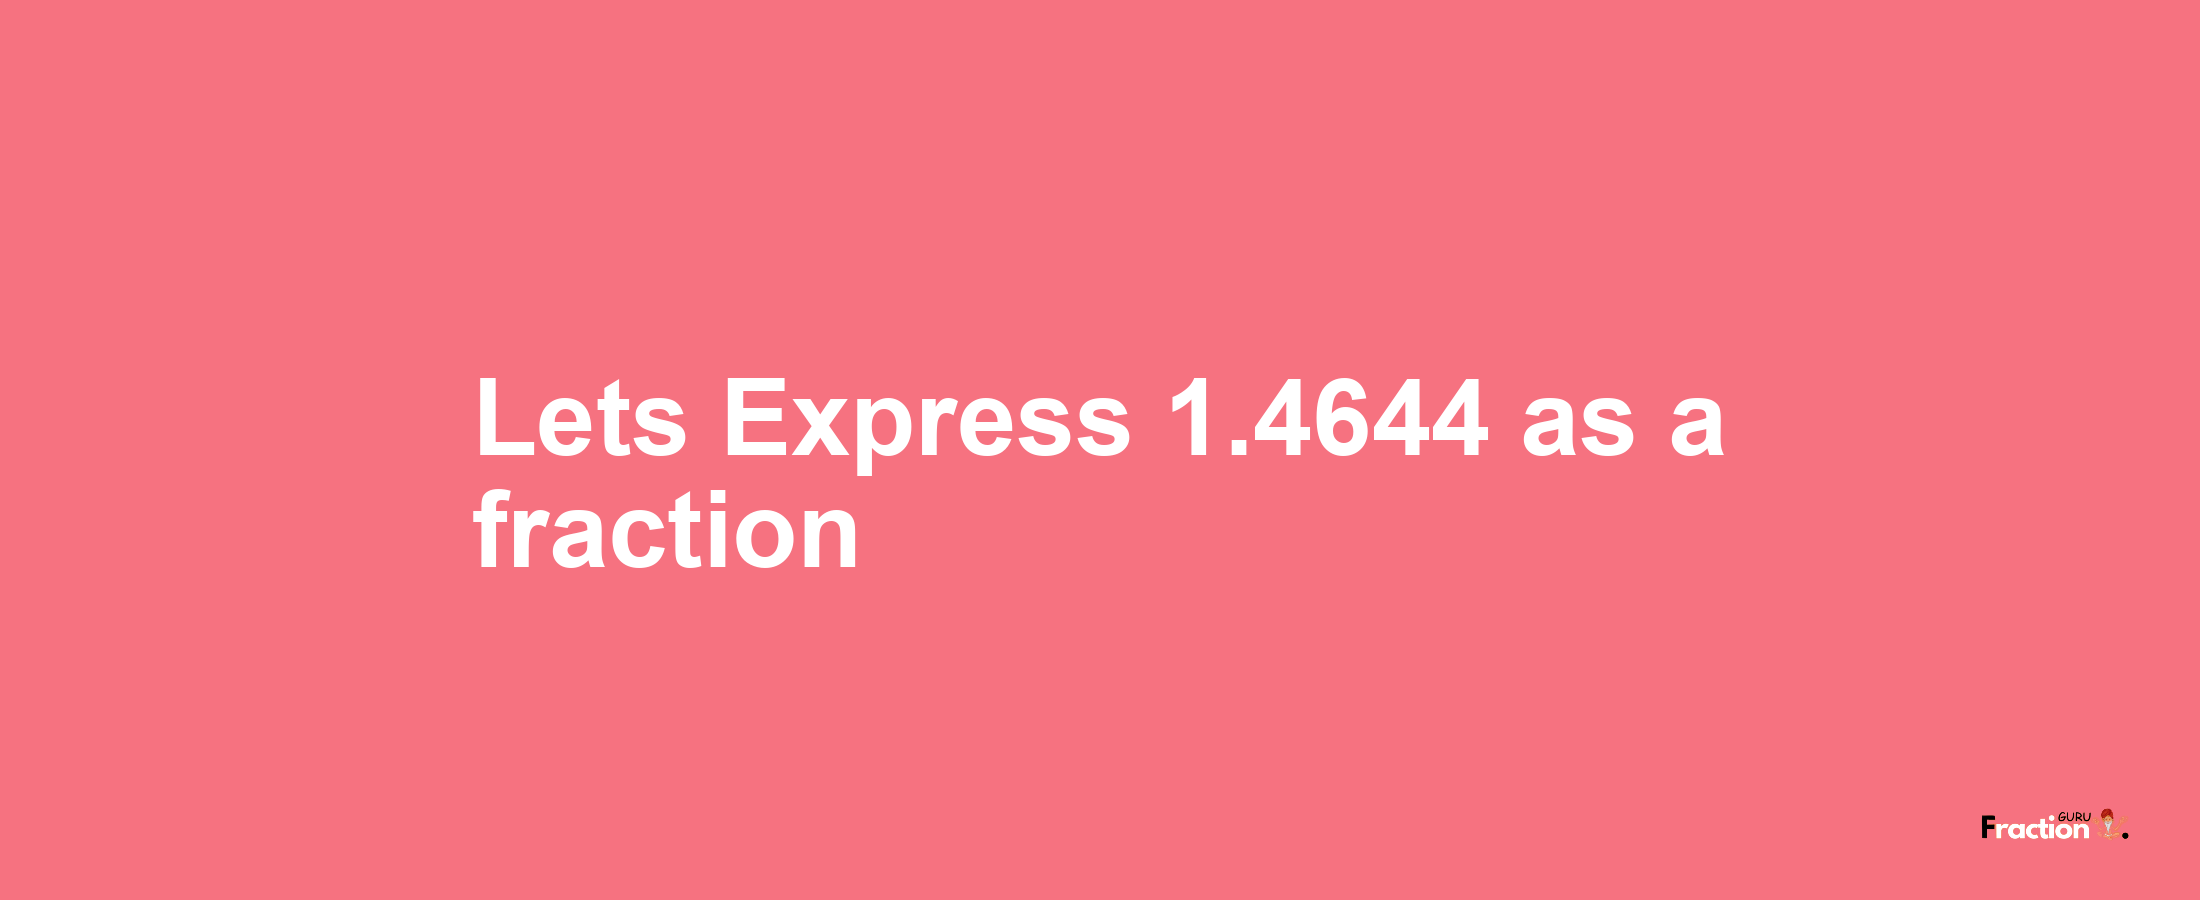 Lets Express 1.4644 as afraction